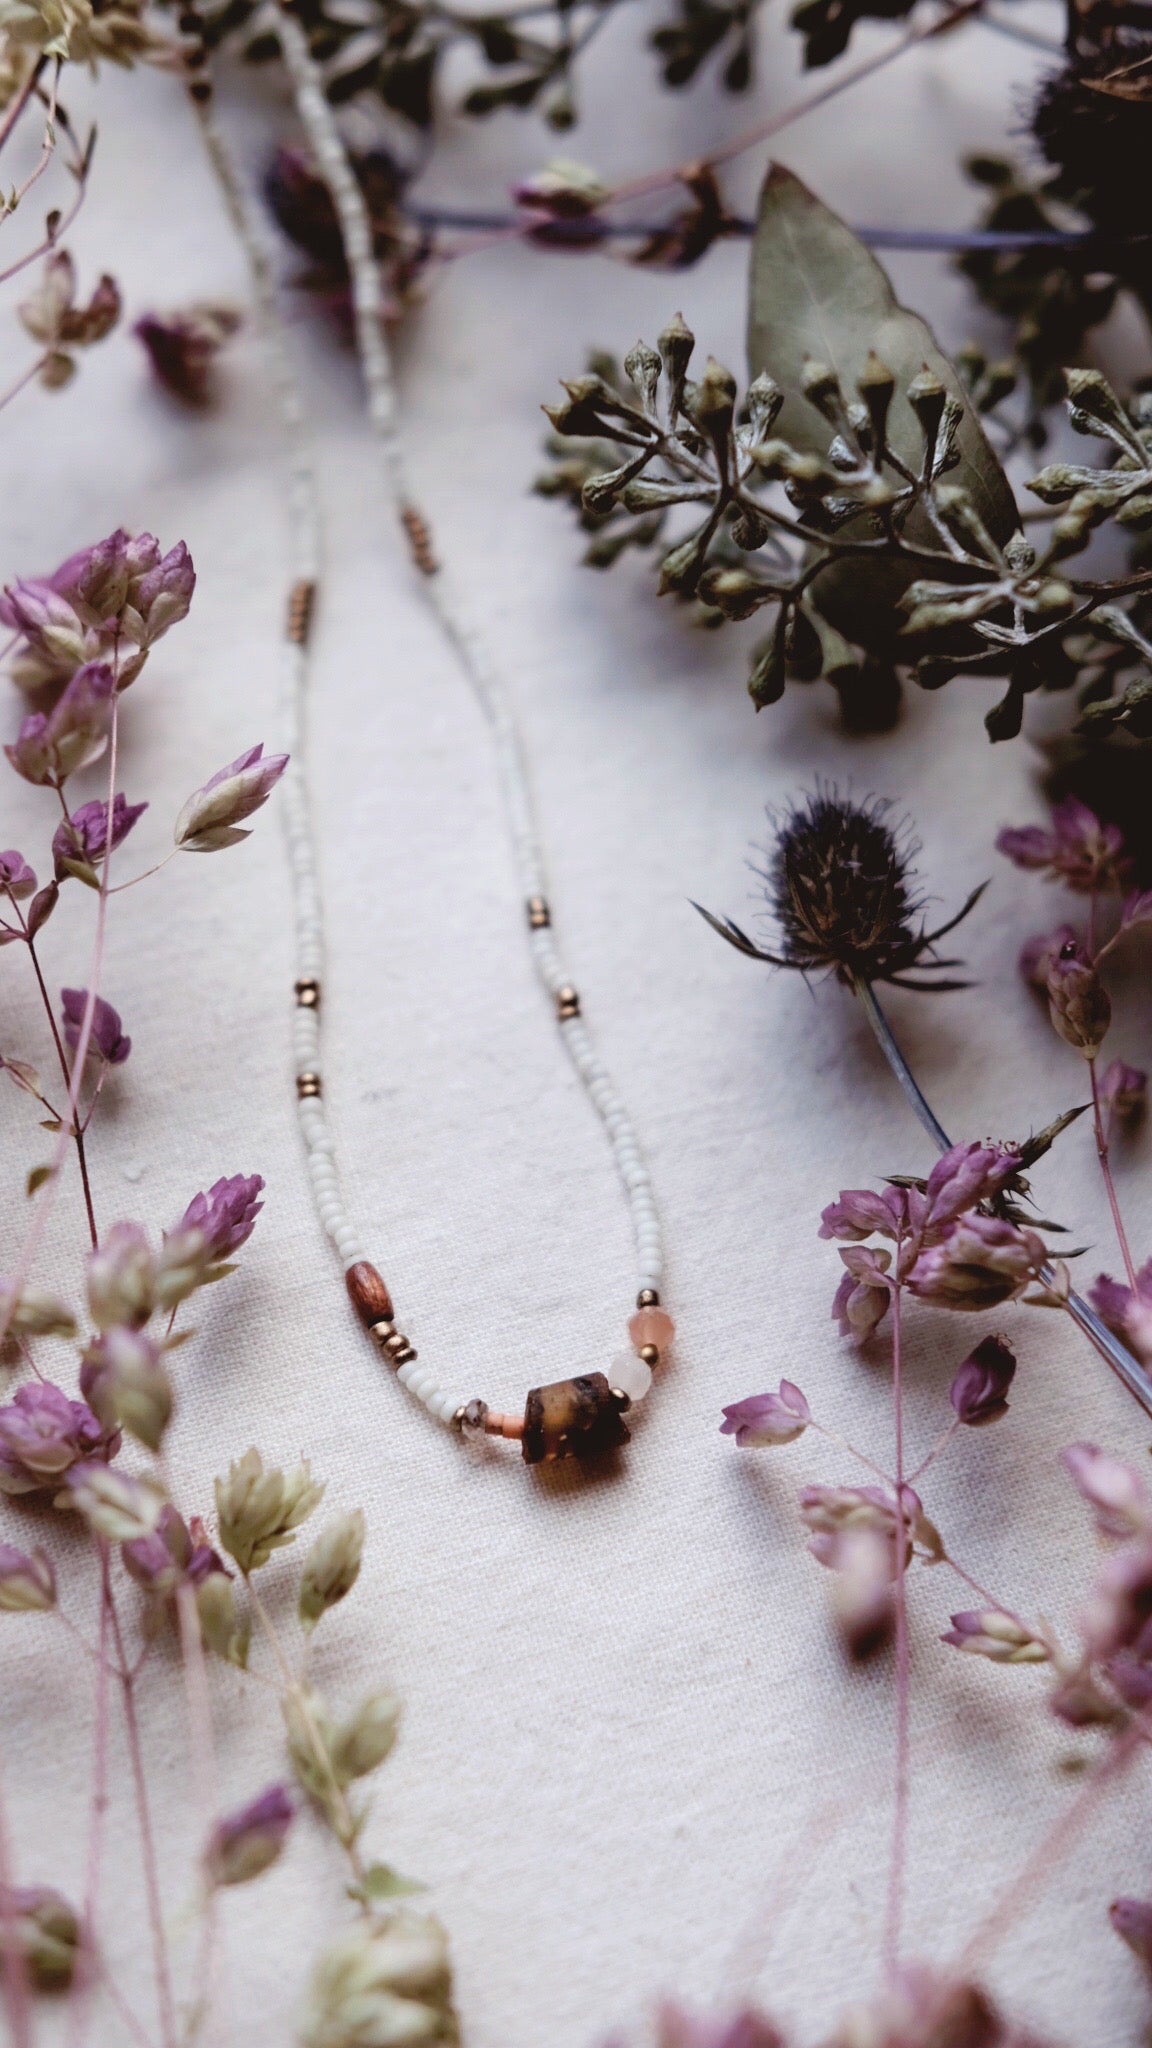 The Numinous + Baltic Amber + Moonstone + Fossilized Coral + Wood + Labradorite necklace